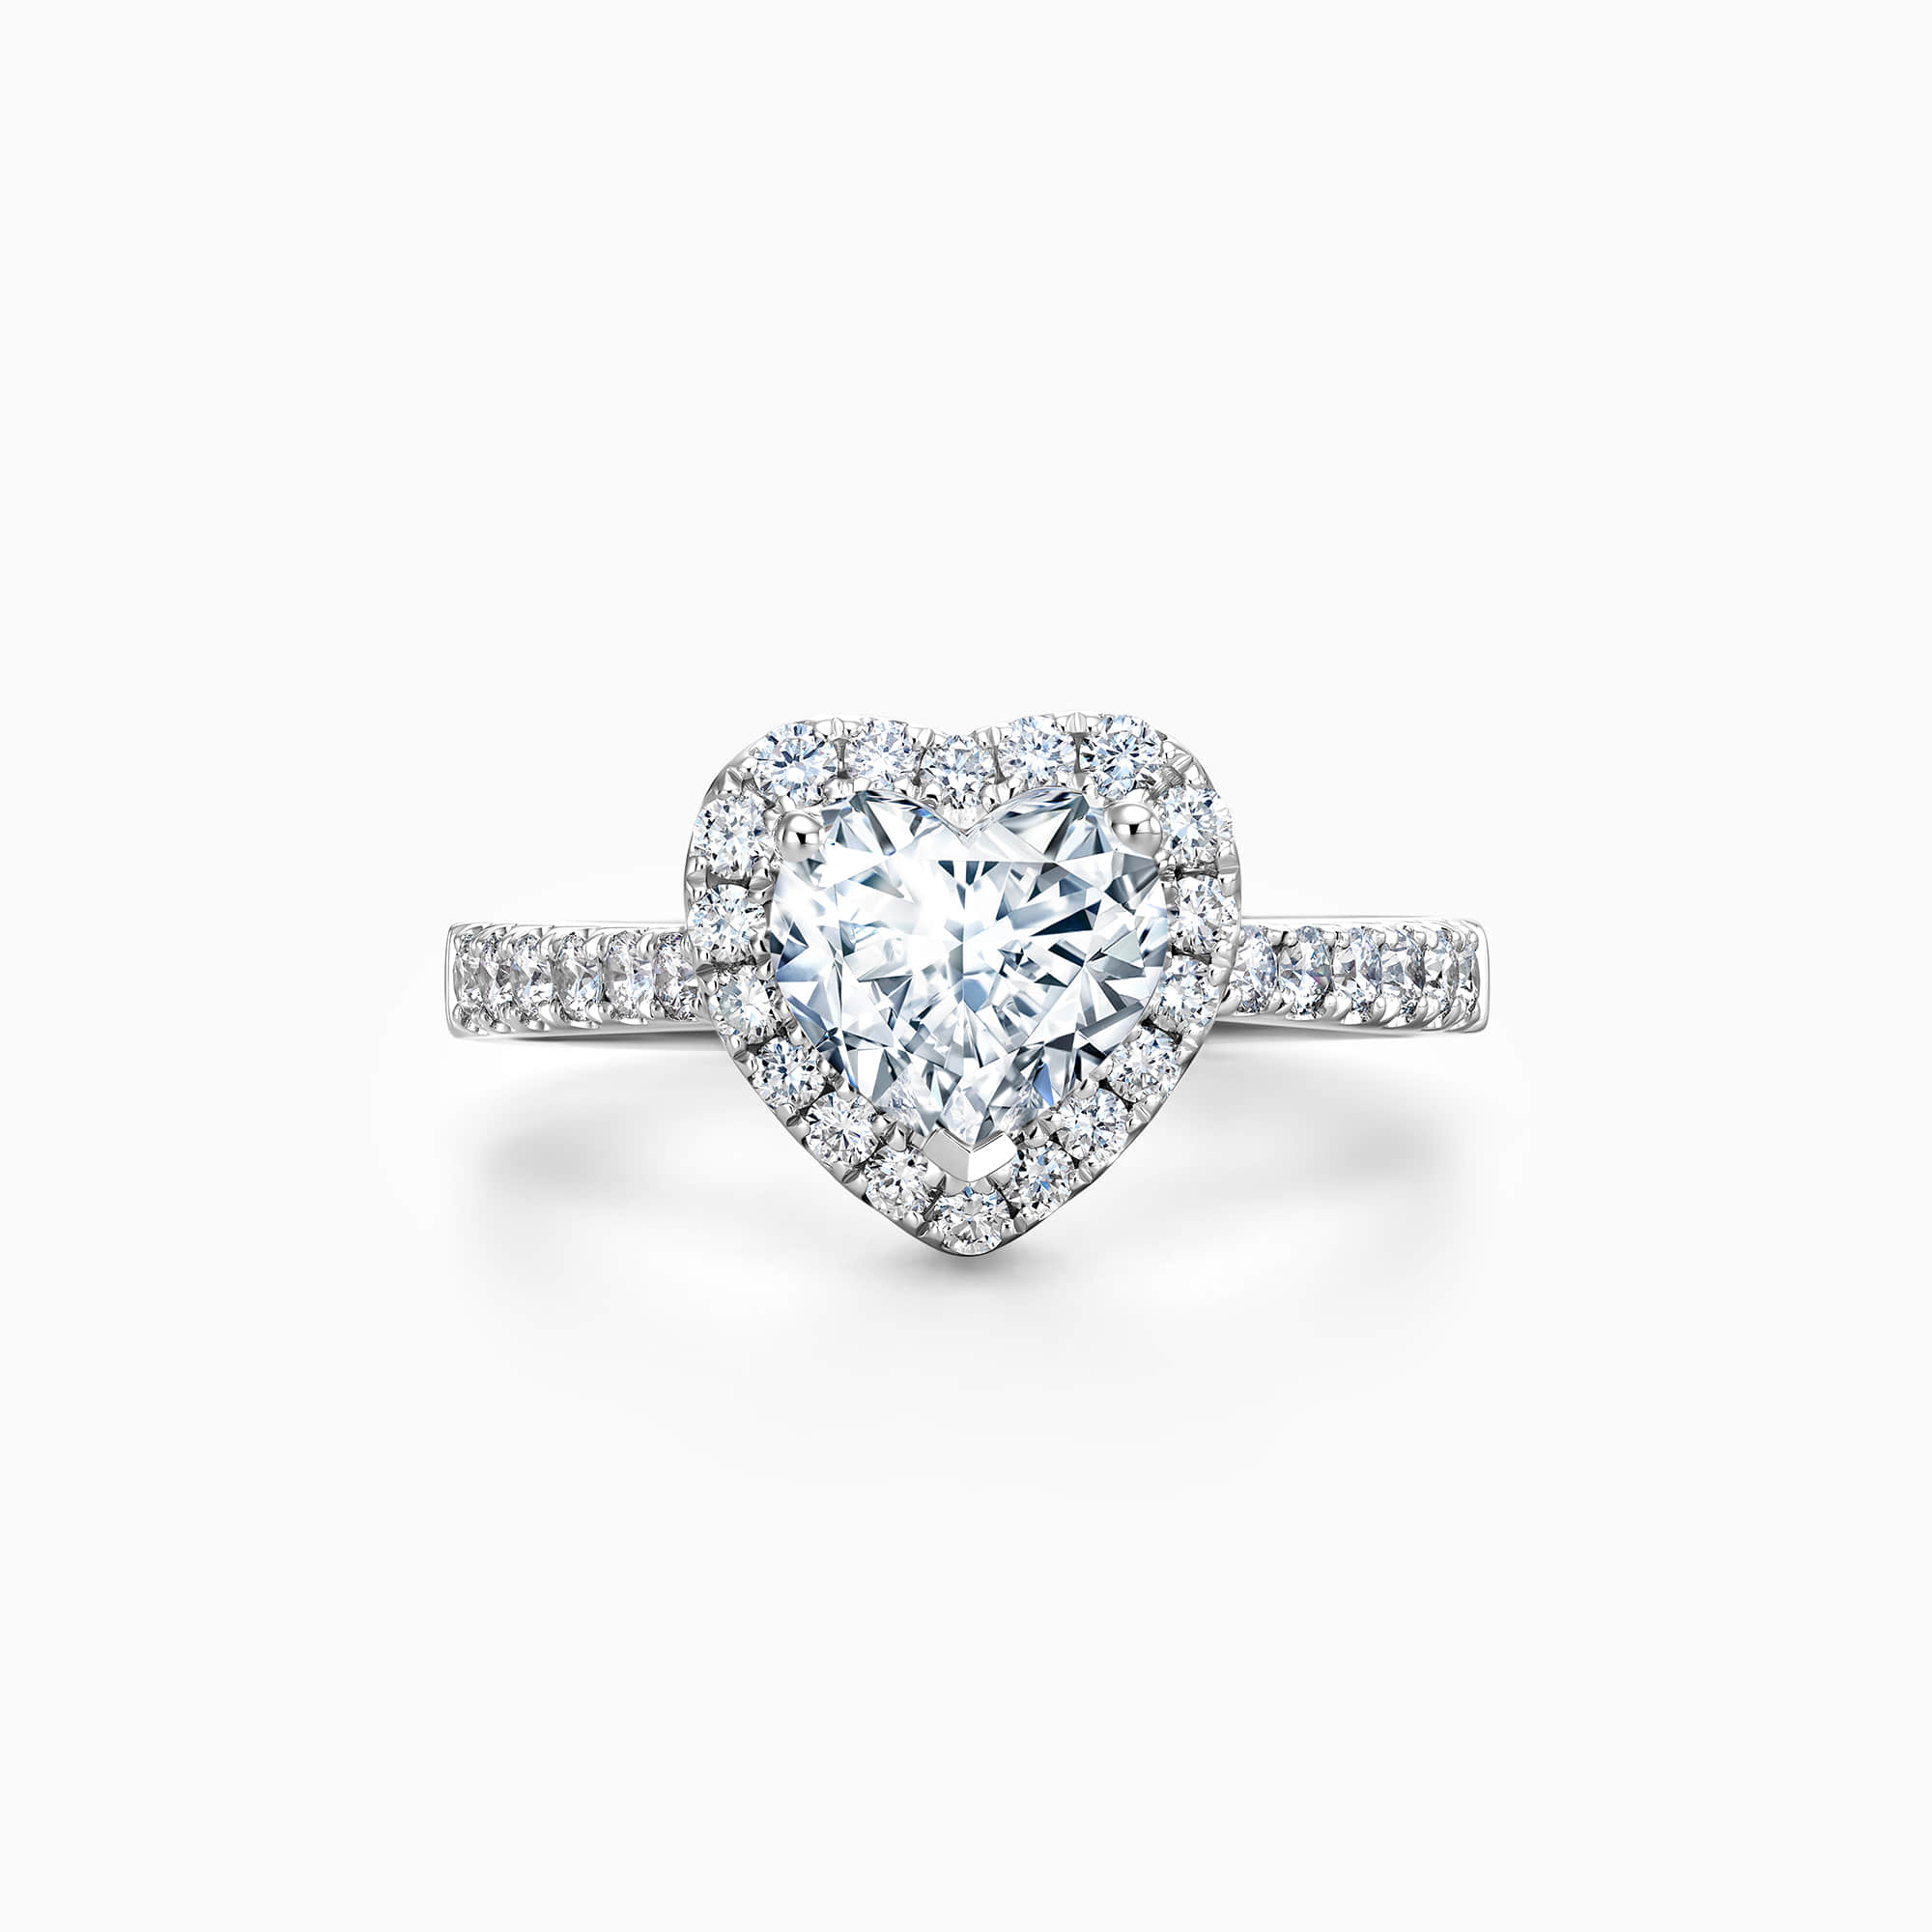 Darry Ring heart halo engagement ring in white gold